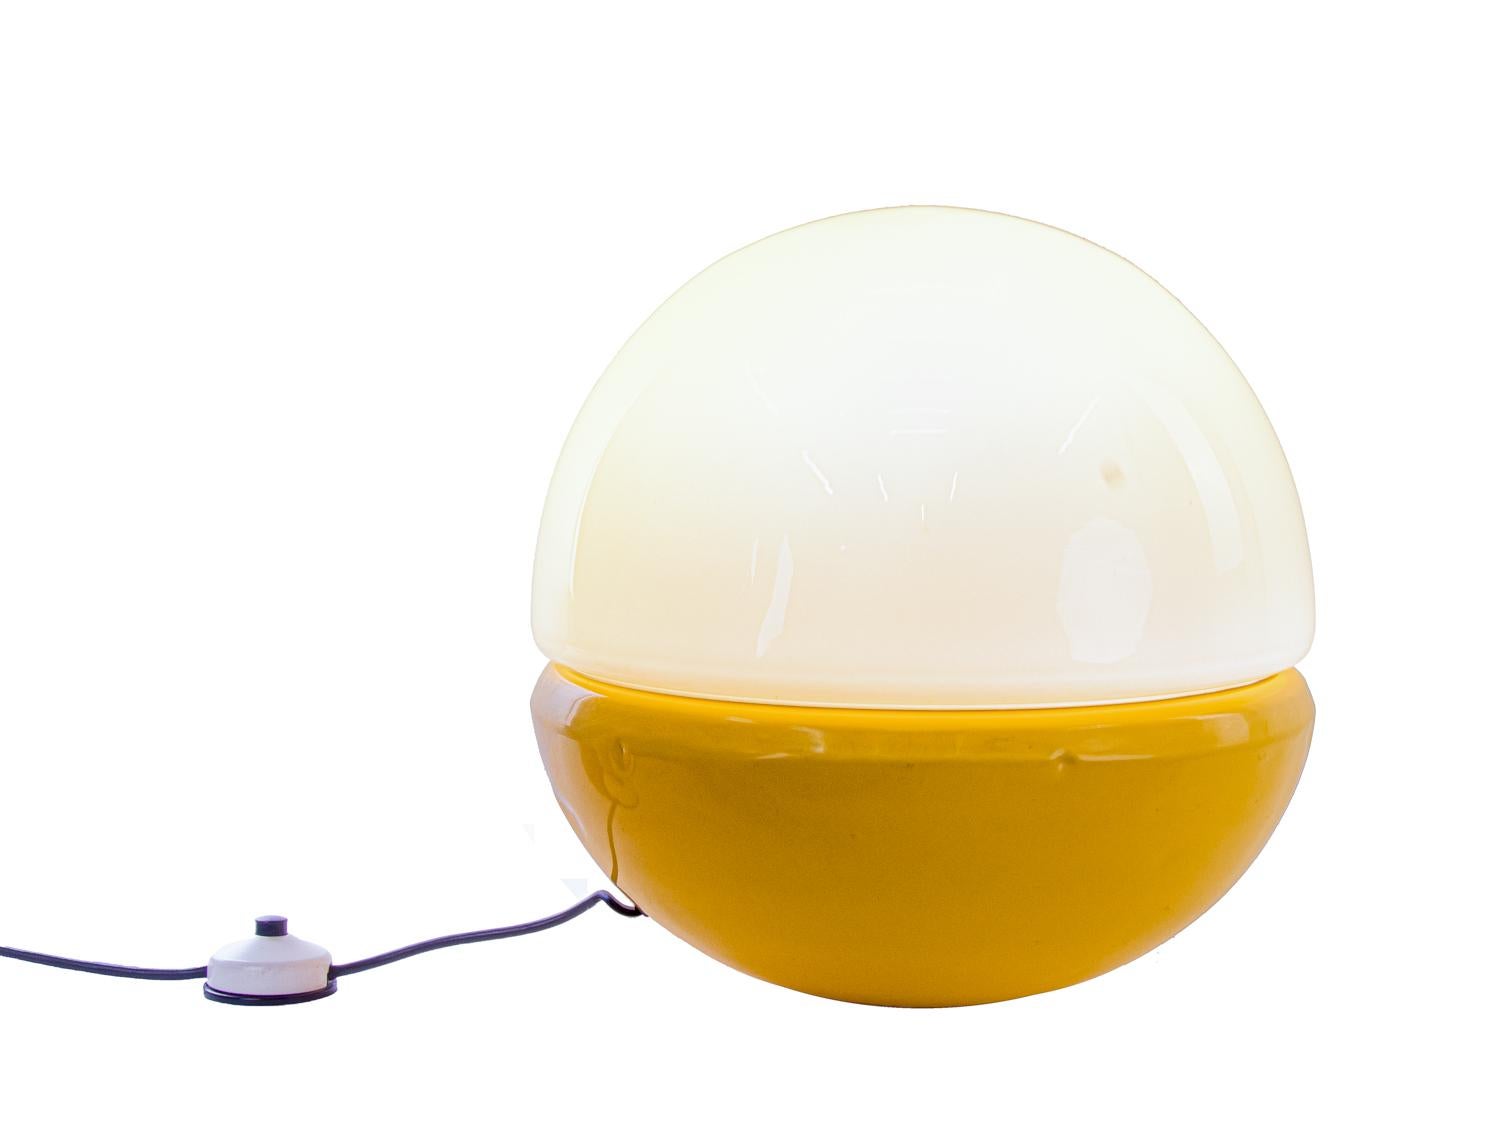 On offer is an extremely rare, breathtaking XL Pop Art floor or table lamp, consisting of a weighted hemisphere made of lacquered metal in yellow-orange and a hemisphere made of white hand-blown Murano glass, which was manufactured in Germany in the